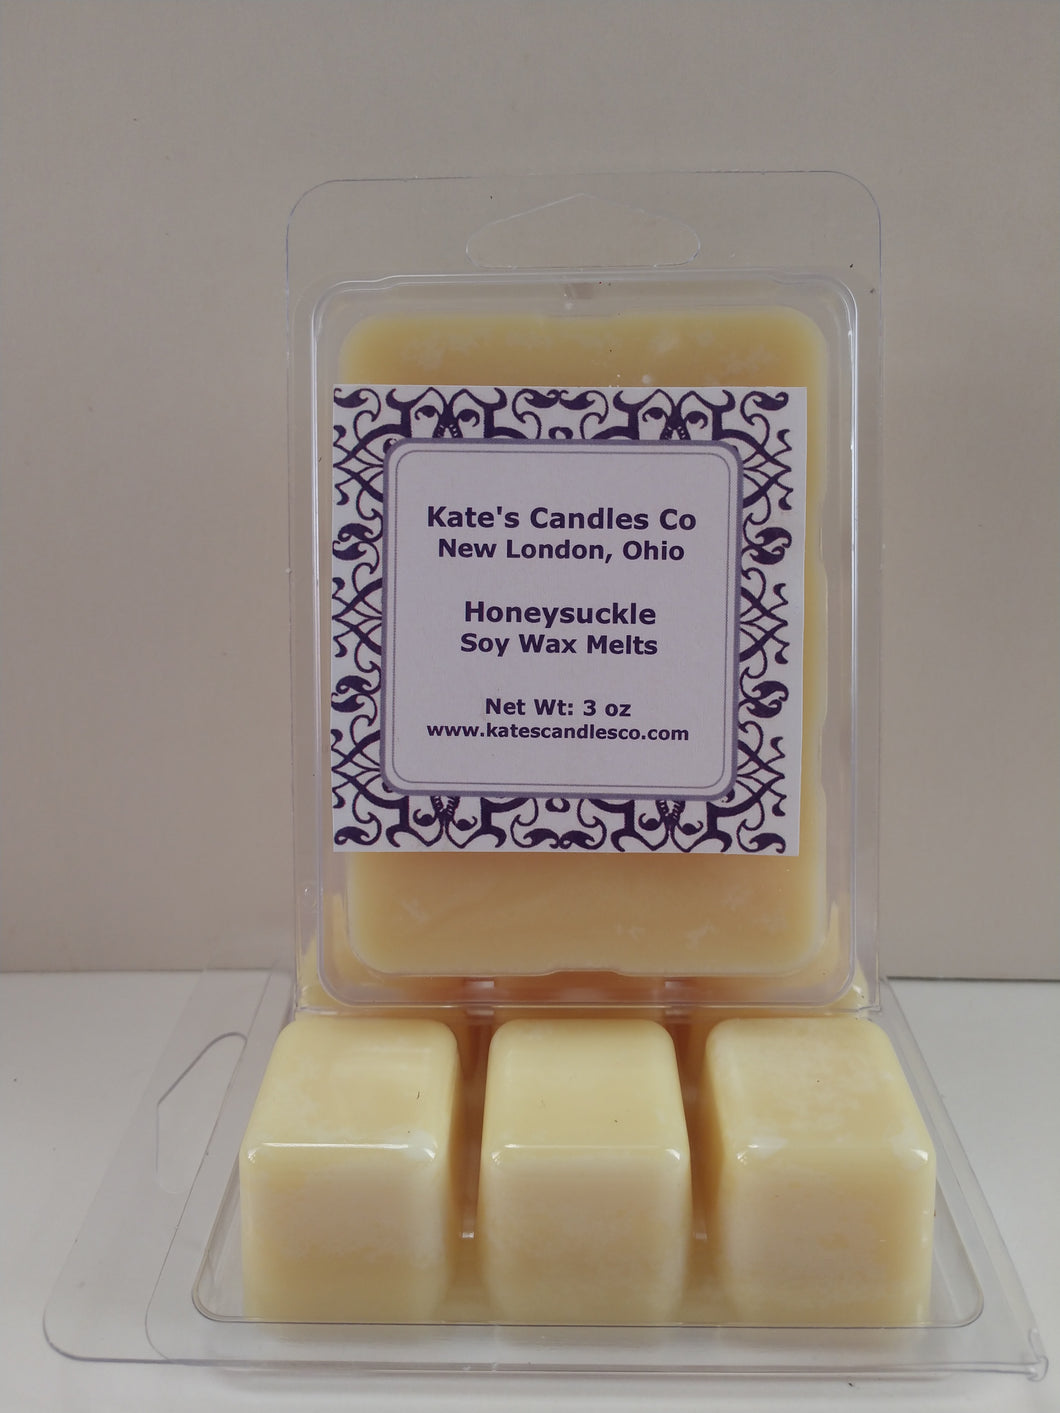 Honeysuckle Soy Wax Melts For Electric or Tealight Wax Warmers - Kate's Candles Co. Soy Candles